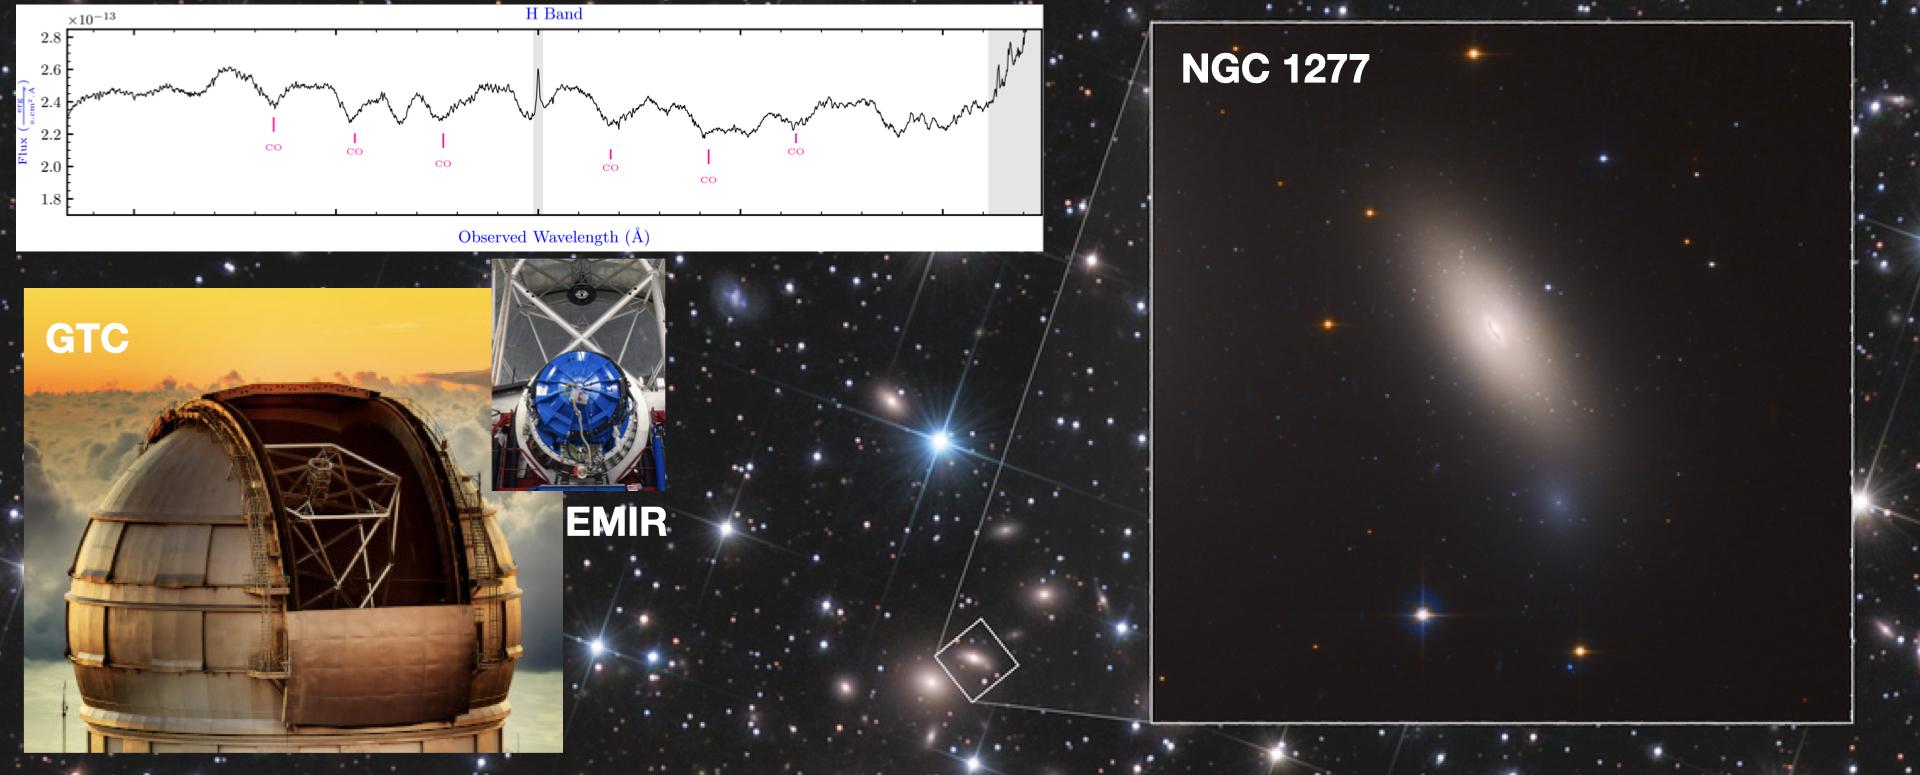 Background is a Hubble Space Telescope image of the relic galaxy, NGC 1277 (Credits: NASA, ESA, M. Beasley, and P. Kehusmaa).  Bottom-left shows the H-band spectrum of the relic galaxy, NGC 1277, obtained with the EMIR spectrograph (middle) at Gran Telescopio Canarias (left) (Credits: pictures of GTC and EMIR are from GTC website).